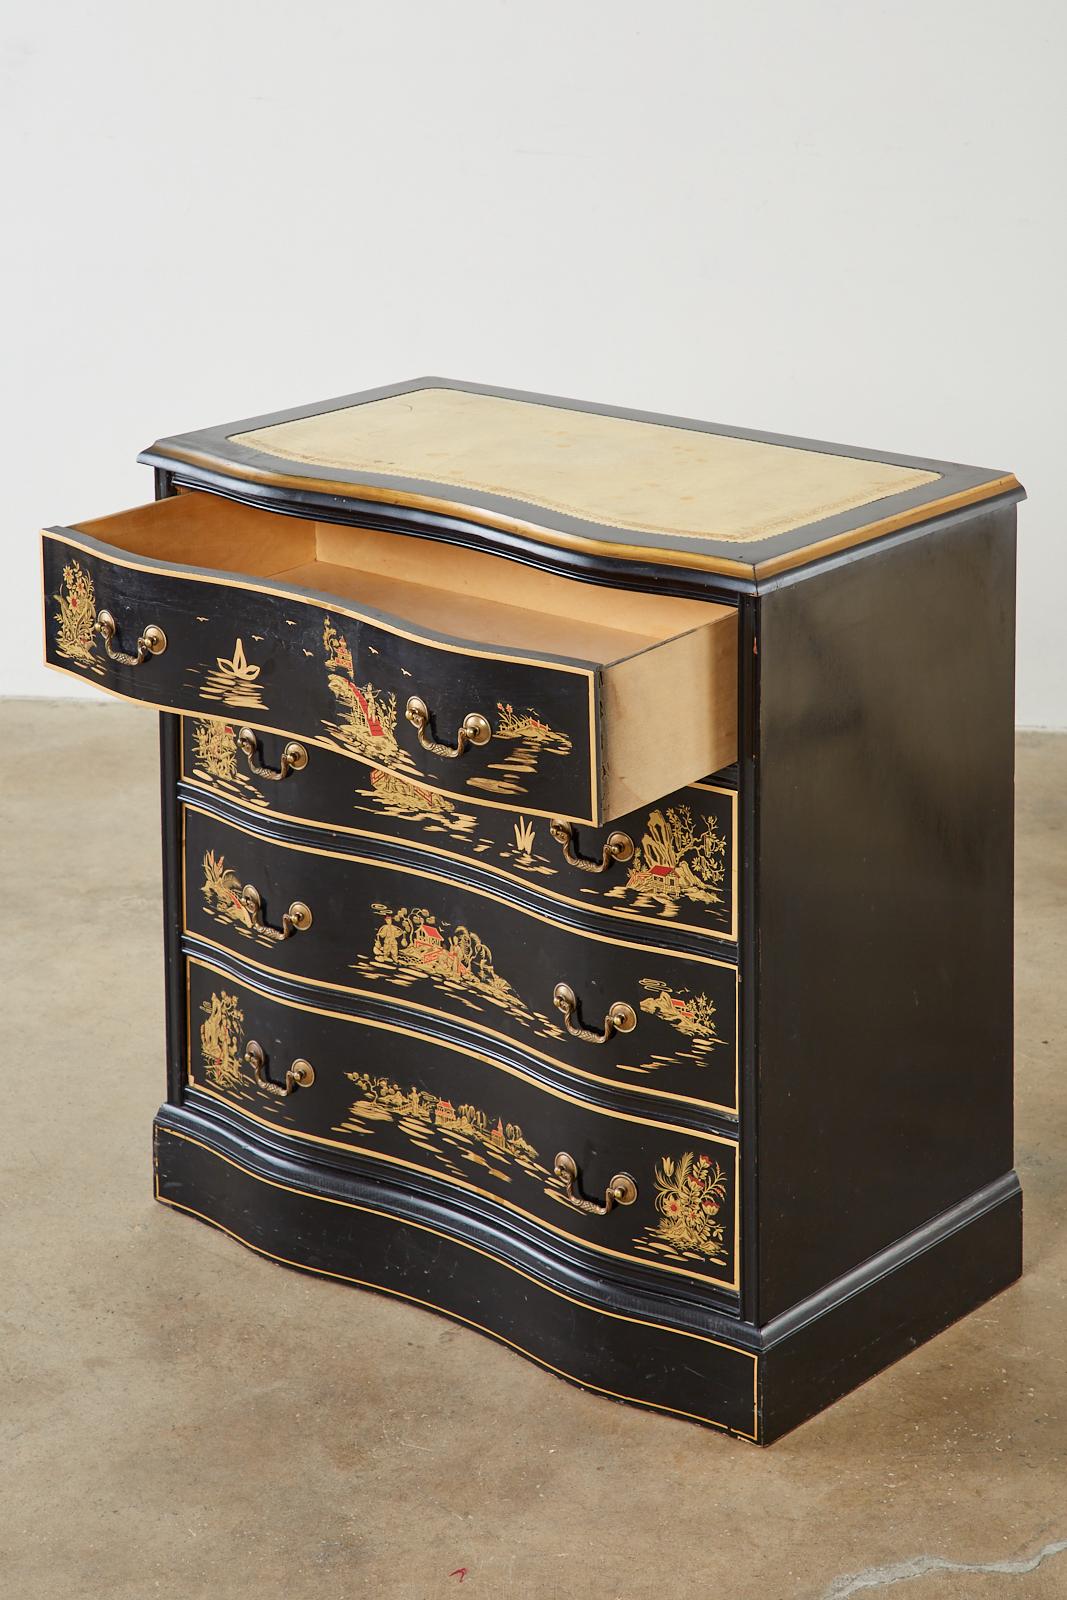 20th Century English Regency Style Chinoiserie Decorated Commode or Chest